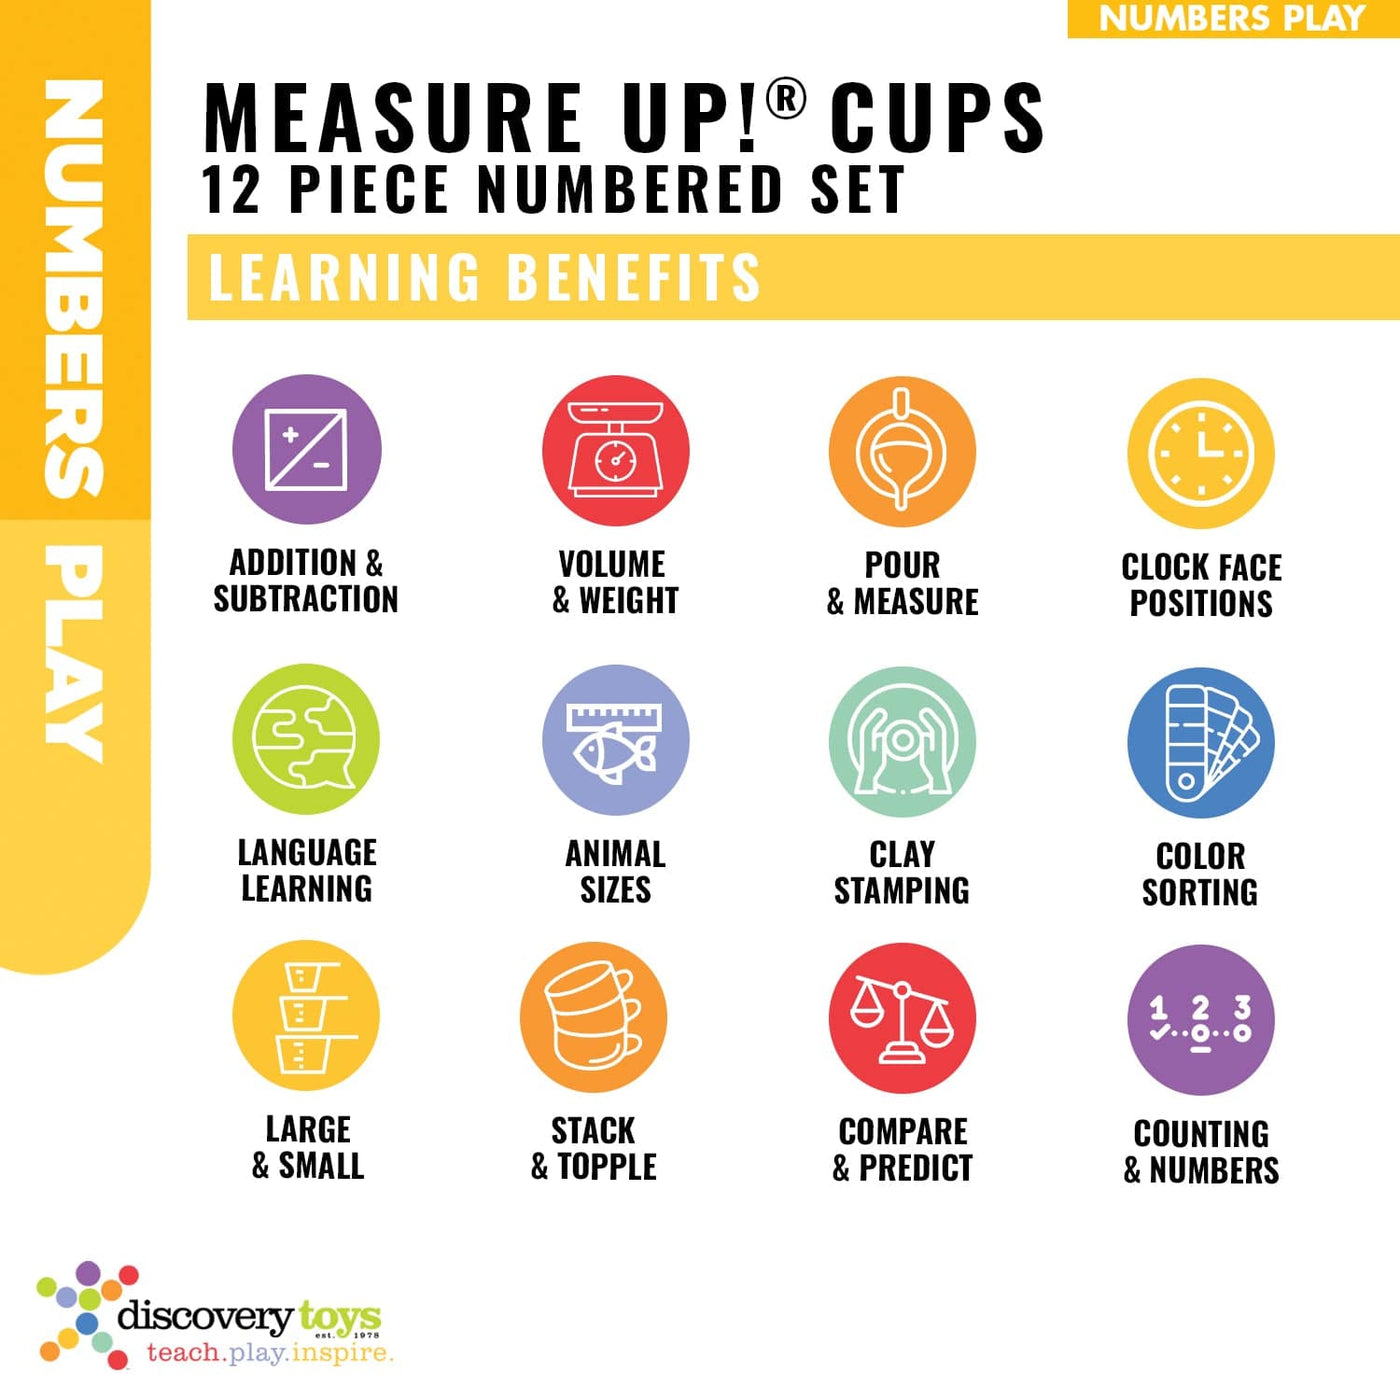 MEASURE UP! CUPS Stacking Cups Educational Toy - Discovery Toys